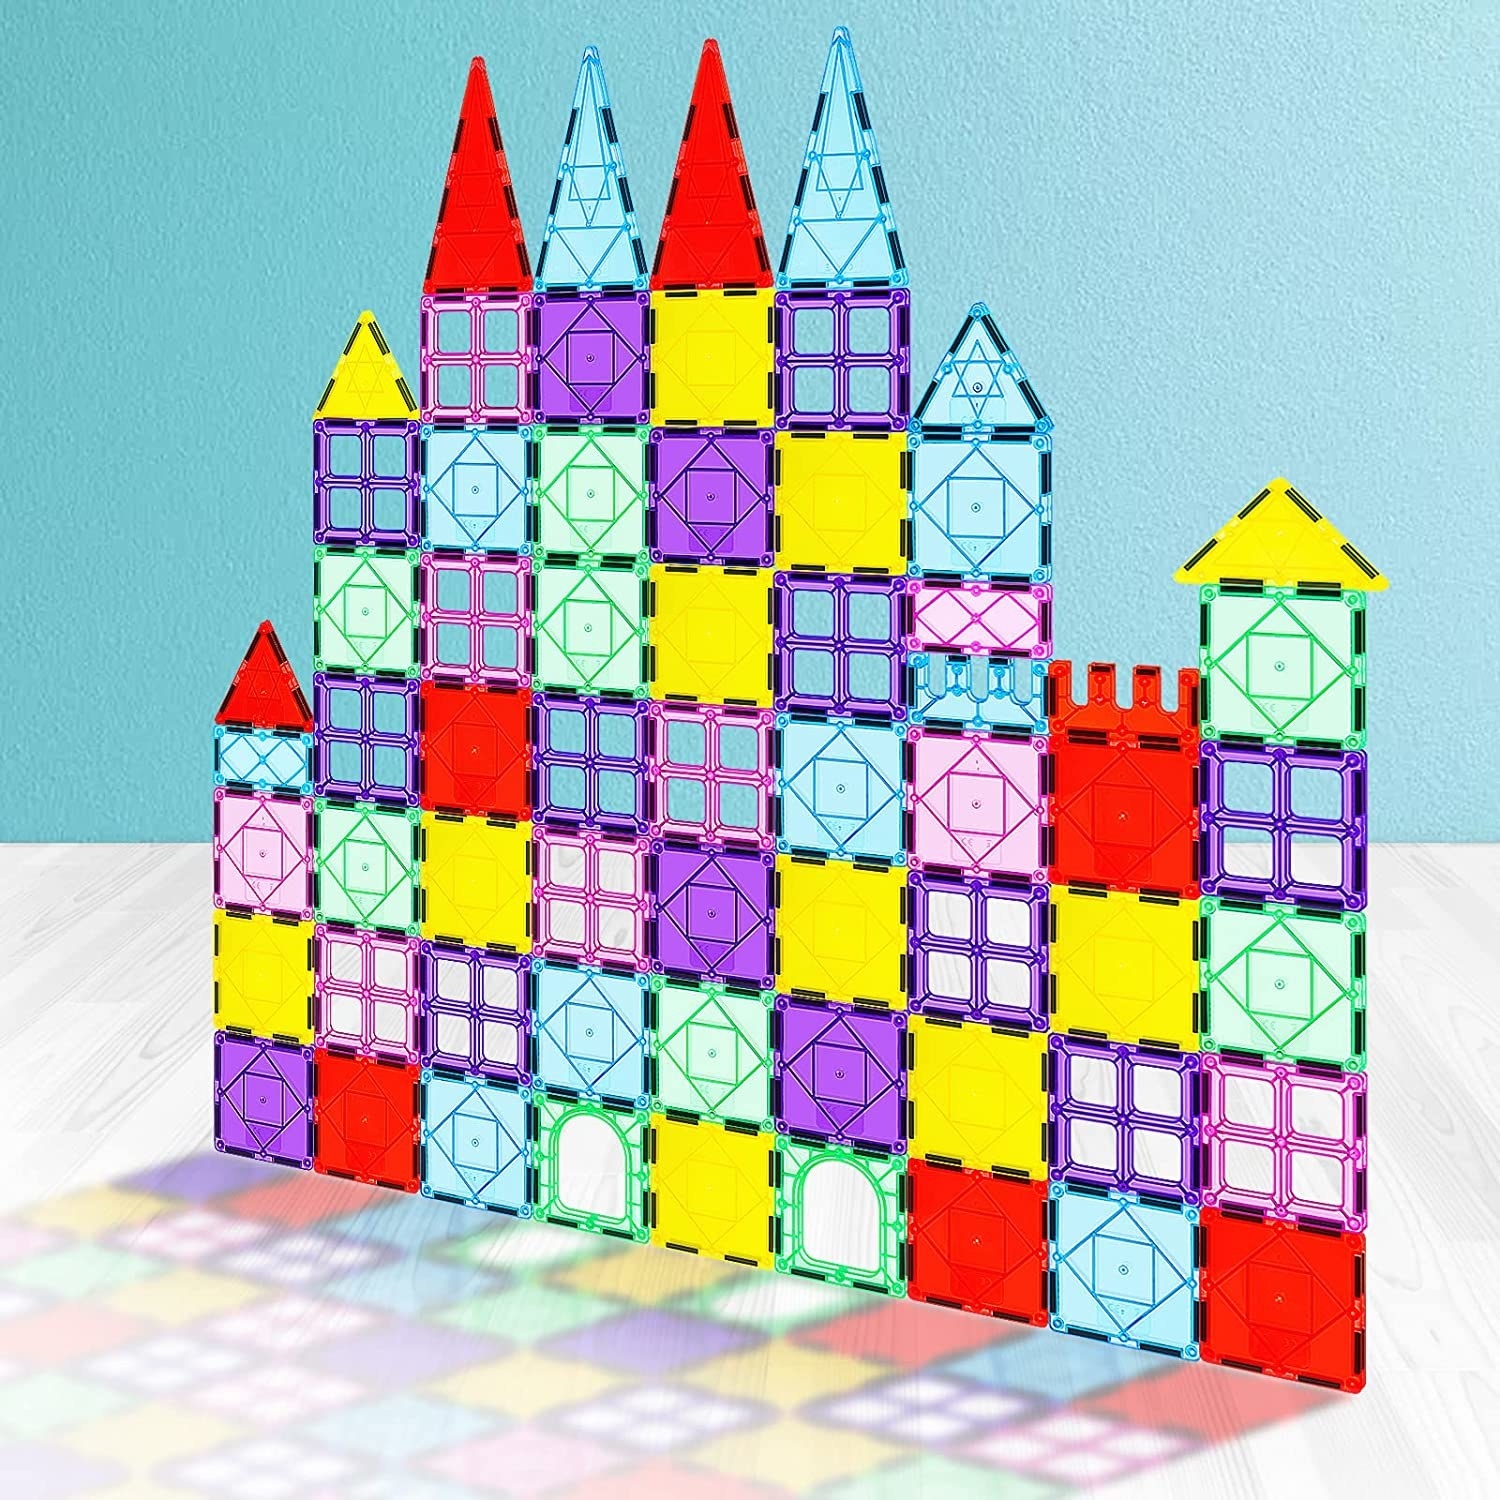 A castle made of the tiles